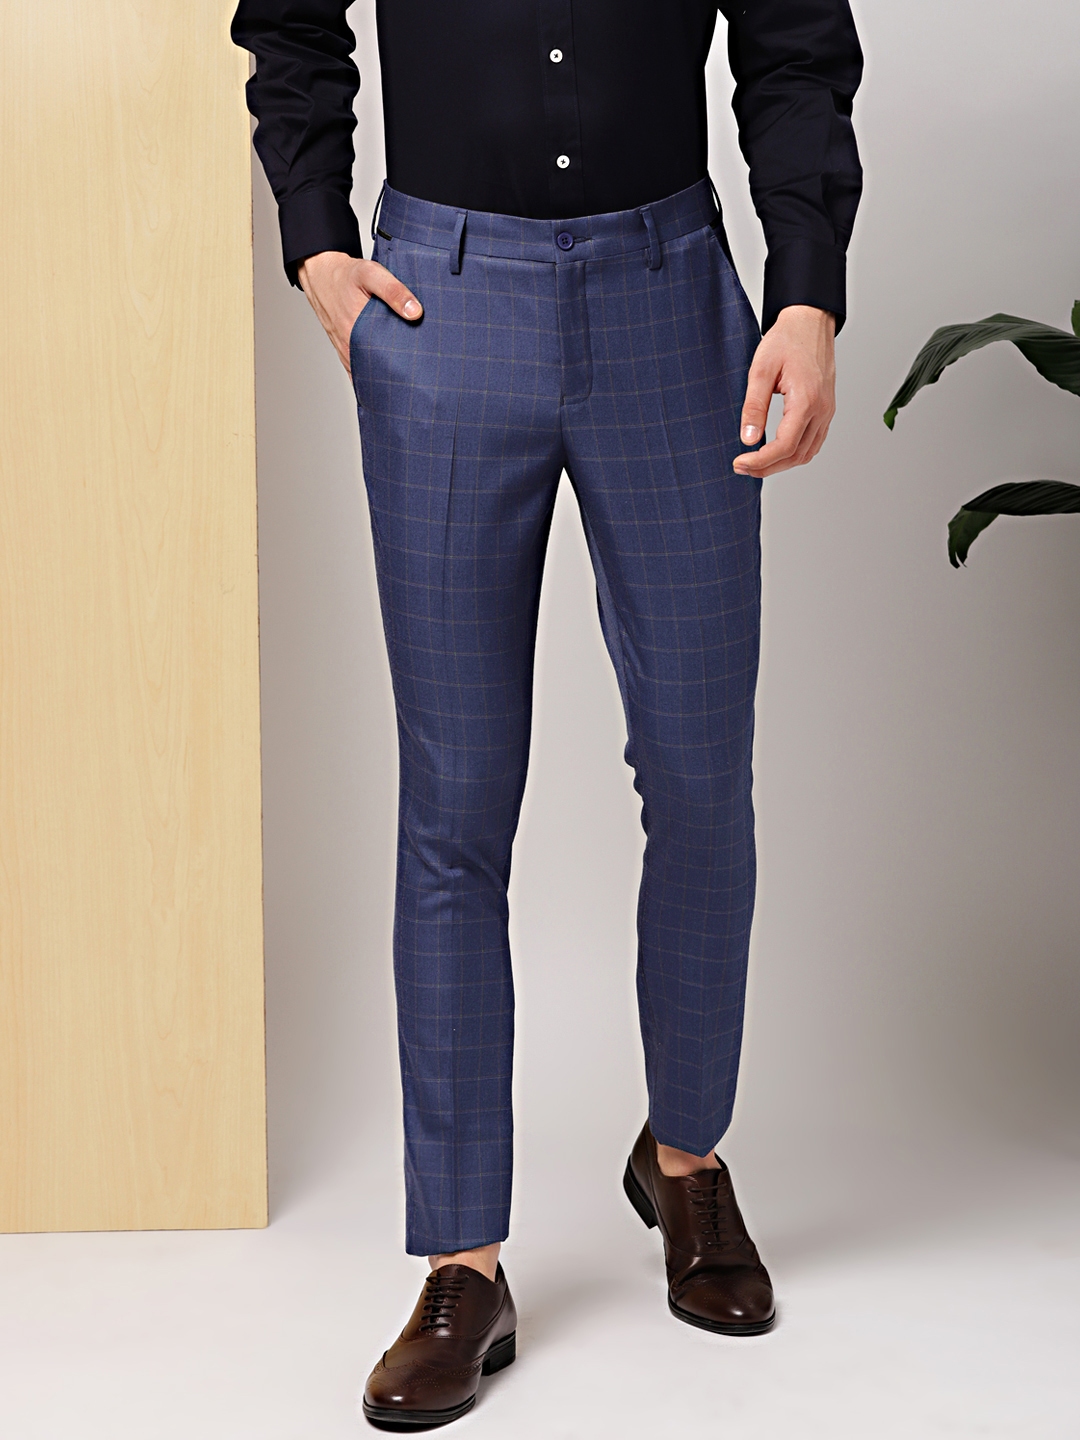 Buy Blue Check Formal Suit Trousers for Men Online at SELECTED  HOMME278312601